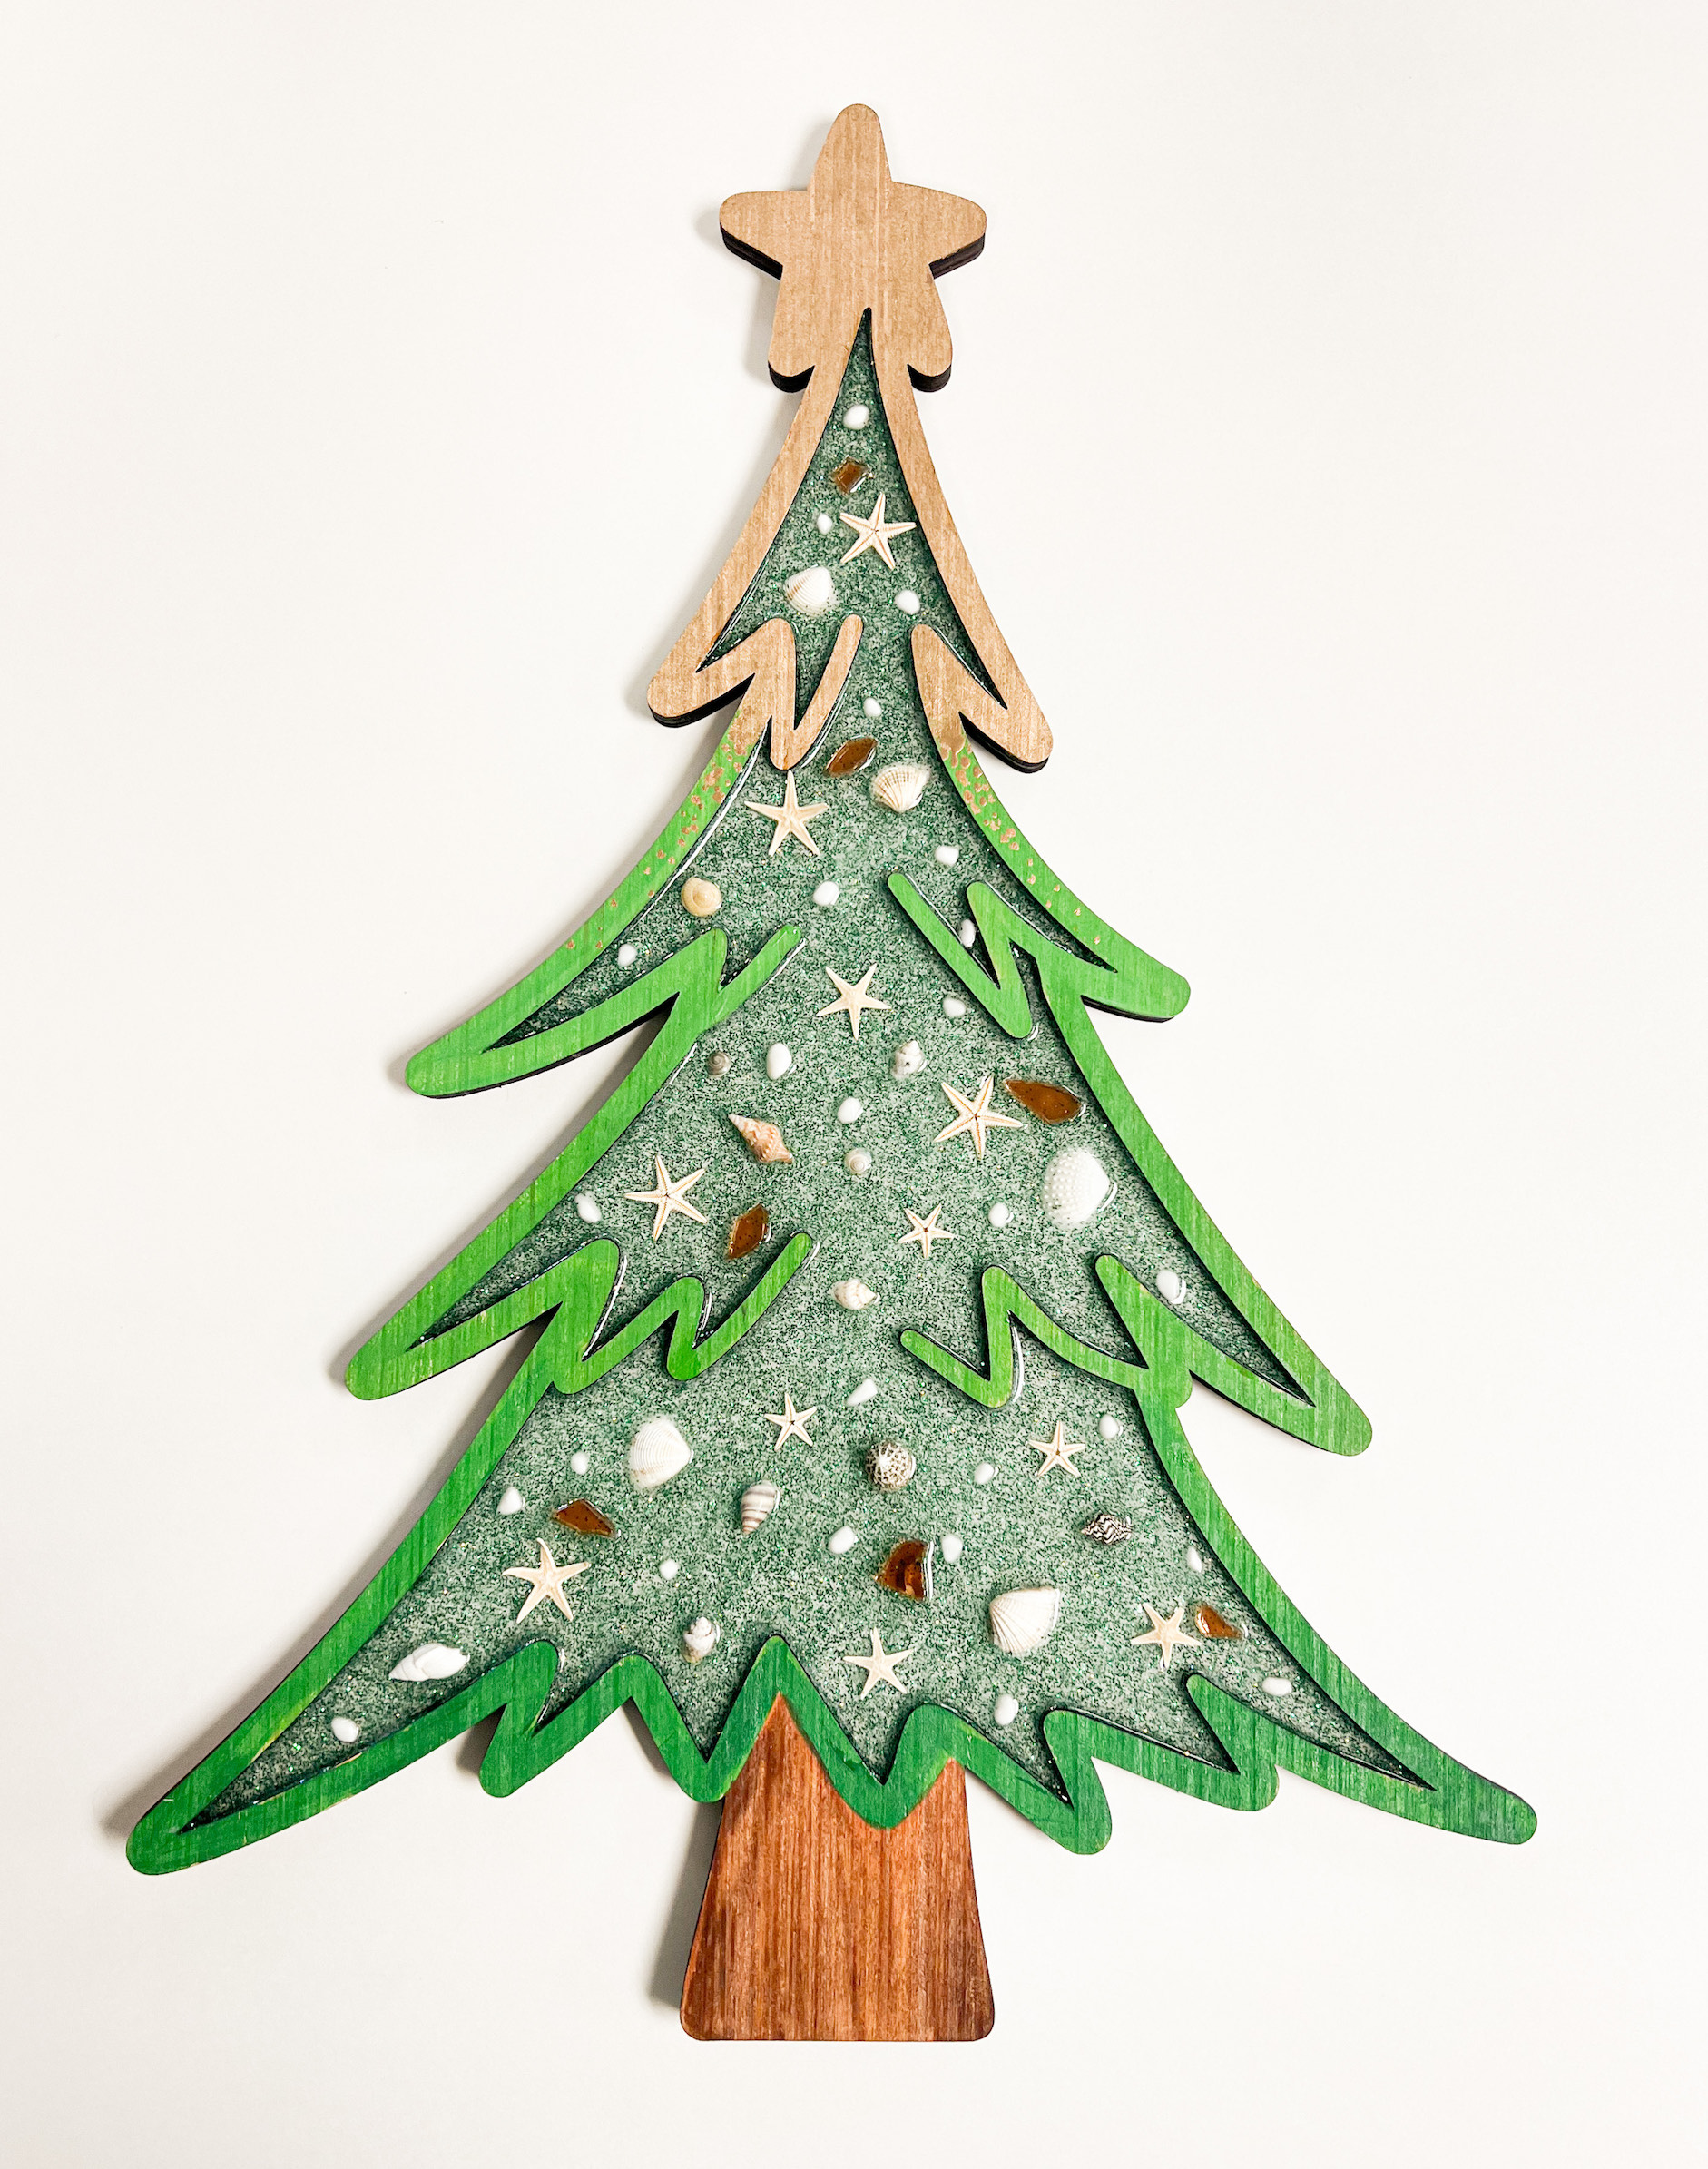 Resin Poured Christmas Tree Workshop!